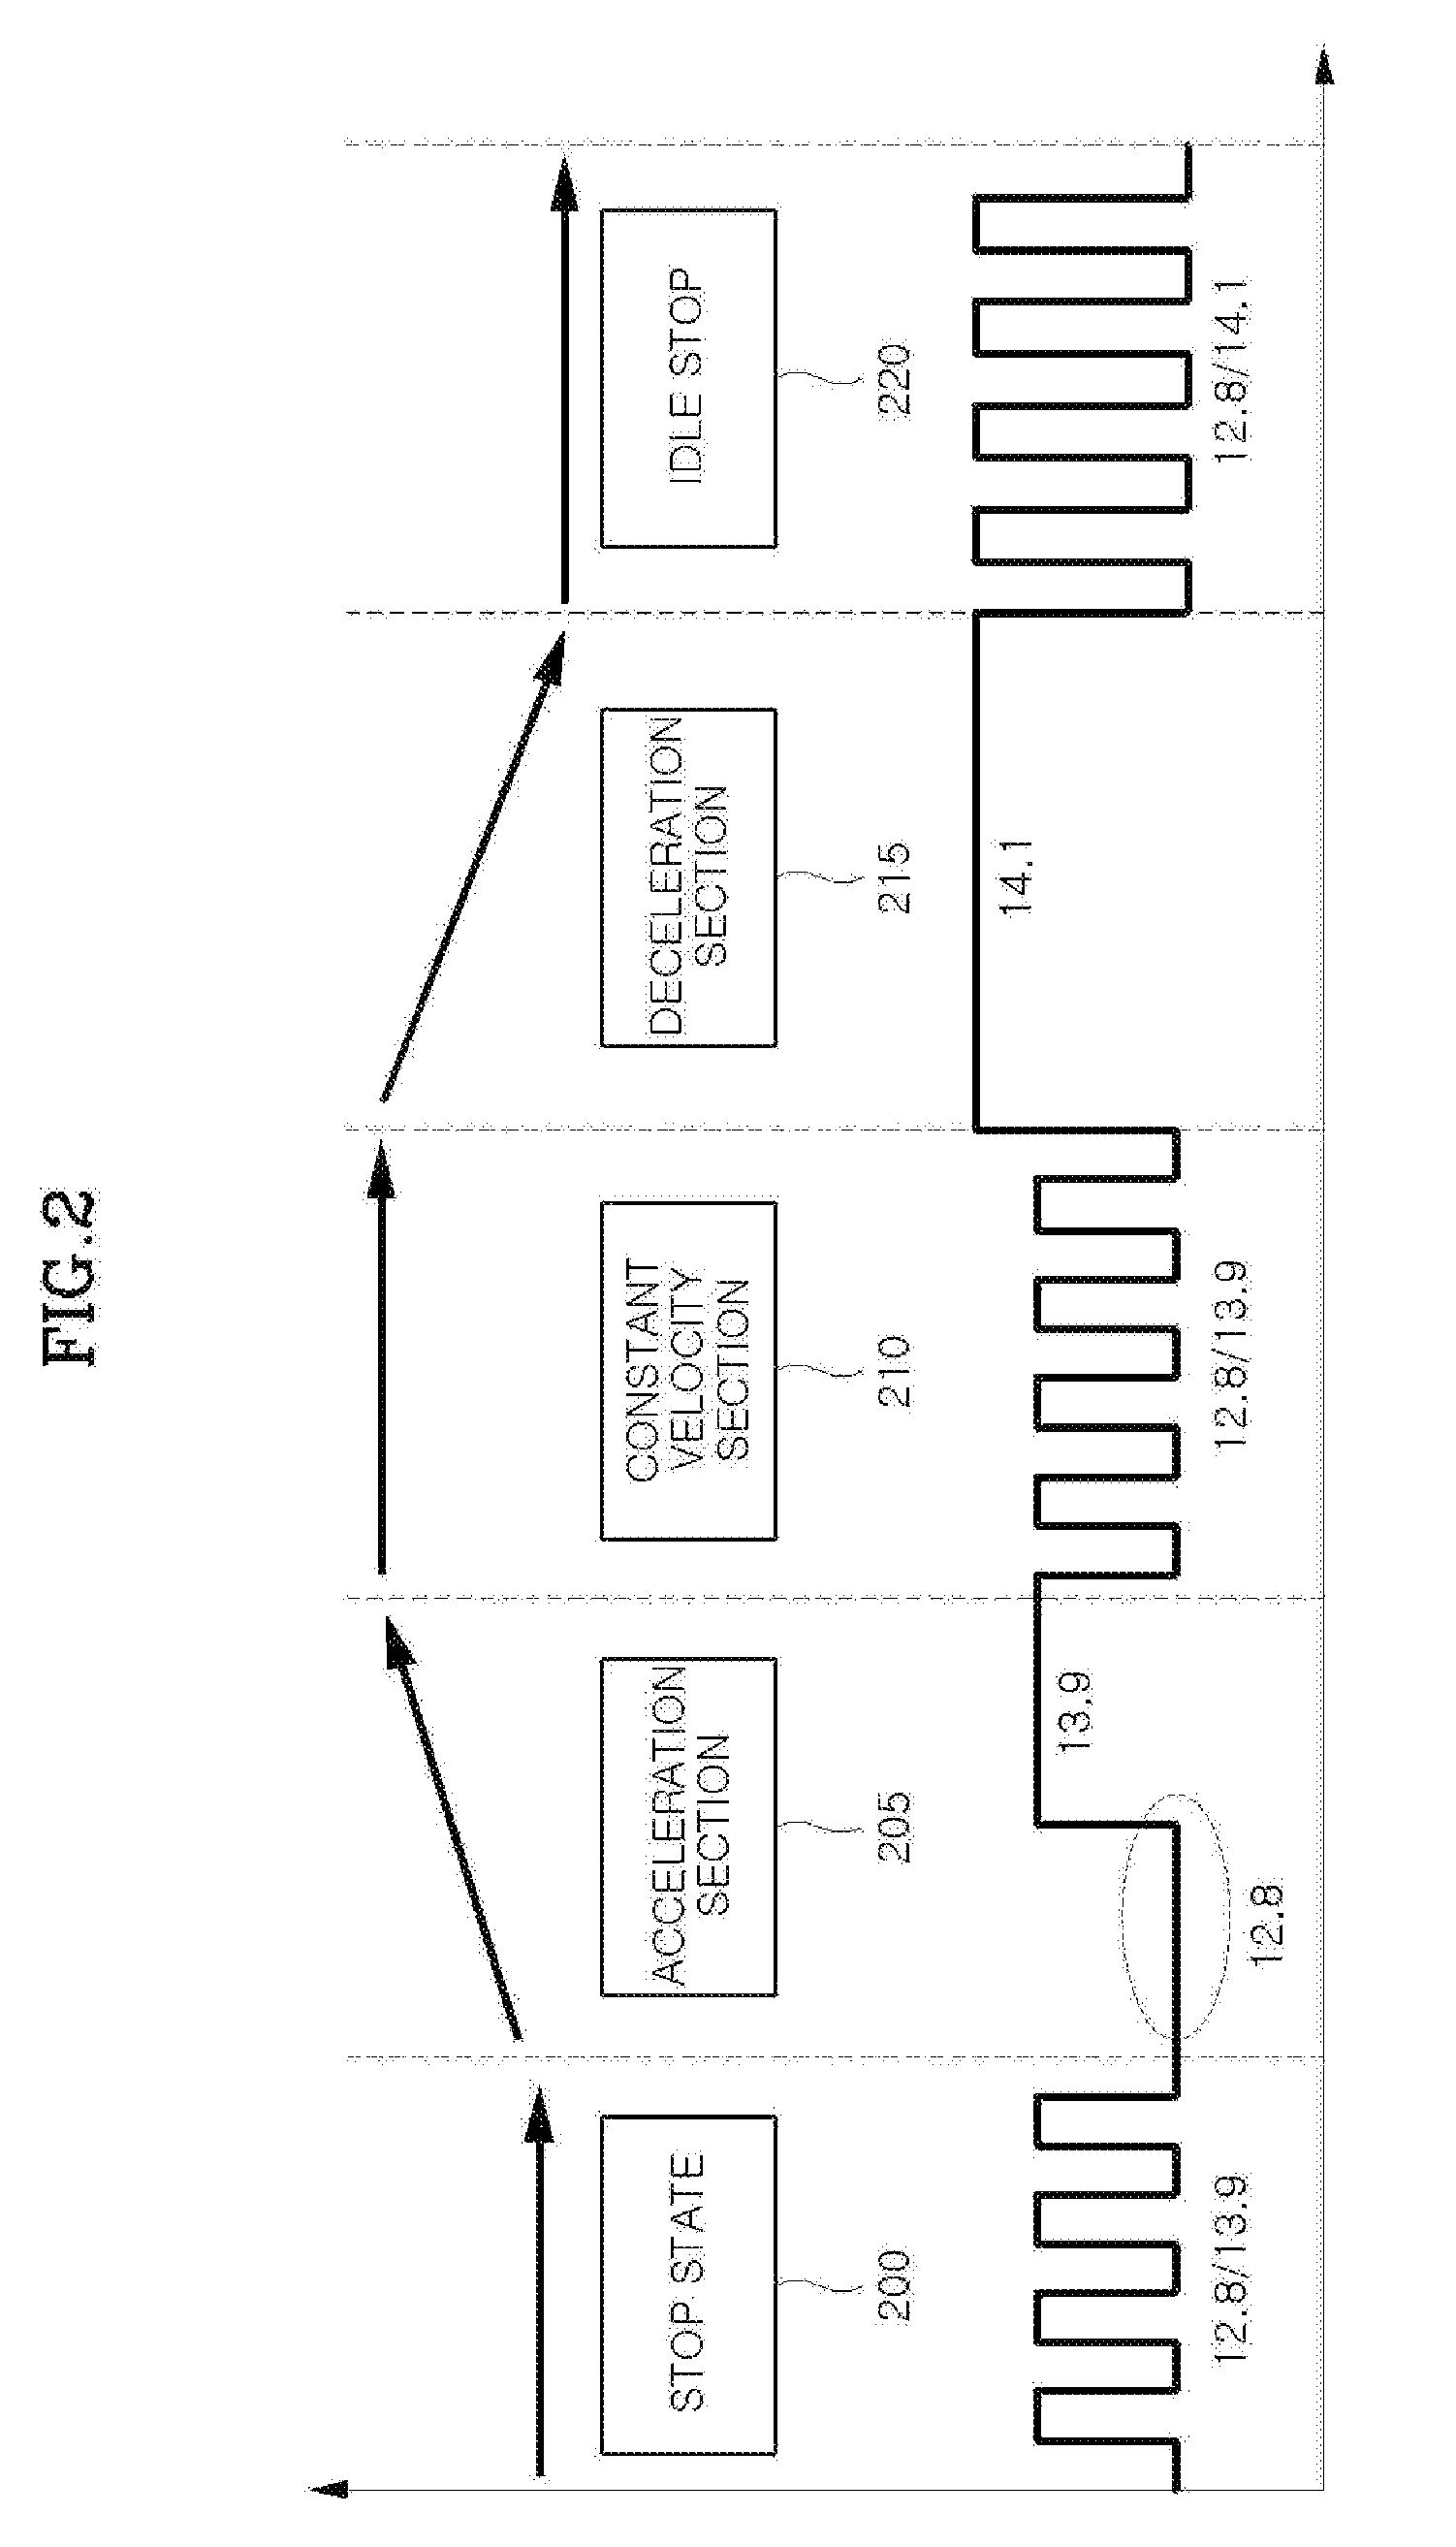 Variable voltage control system and method for hybrid vehicle